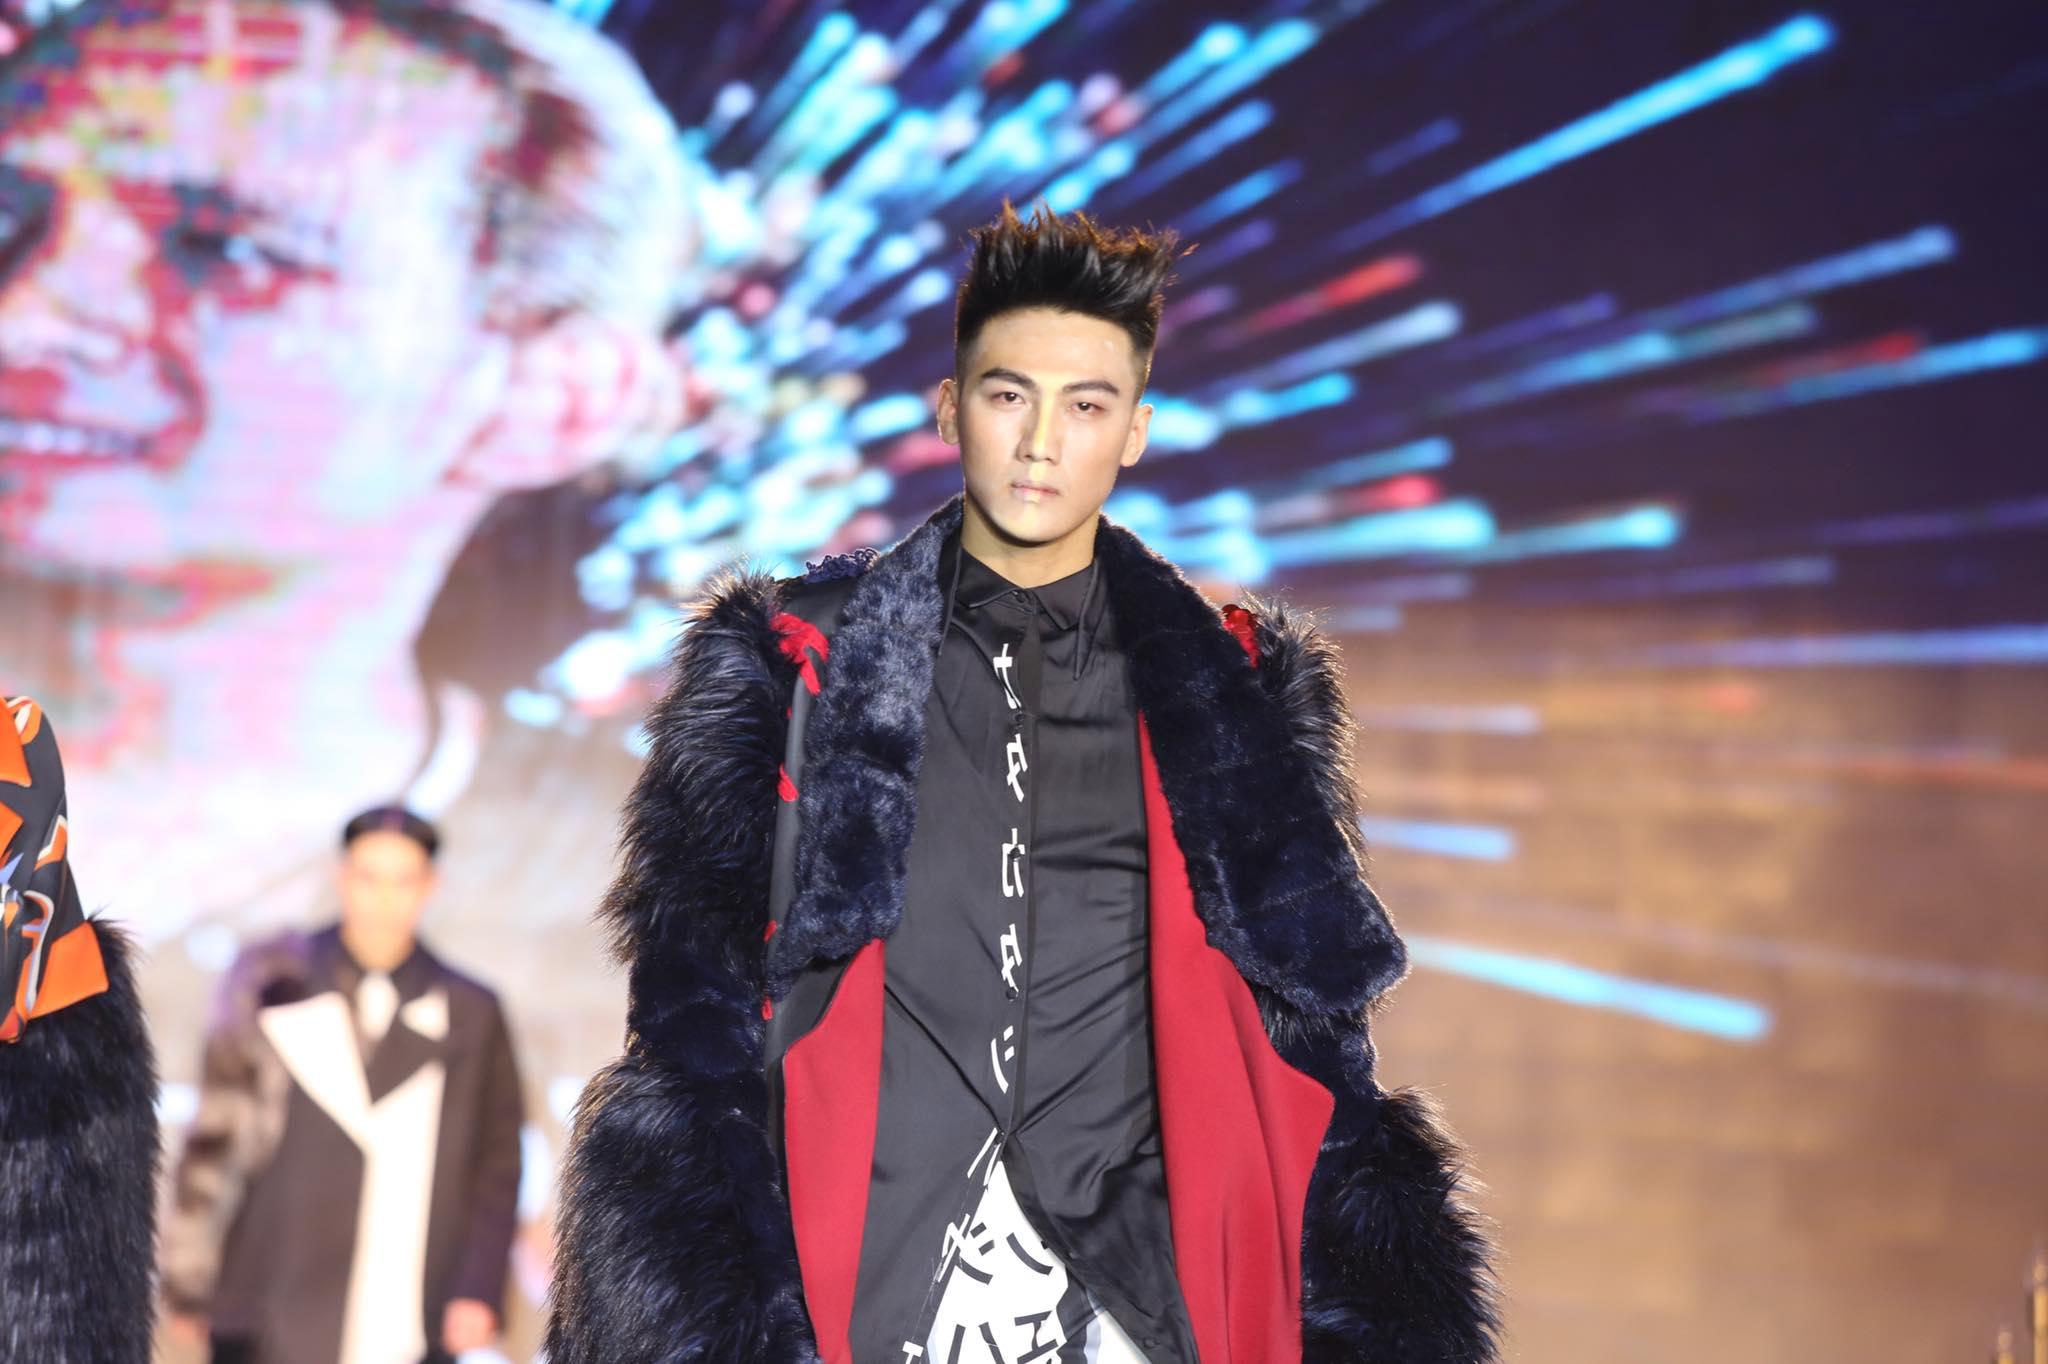 Picture of model Mac Trung Kien at a fashion event